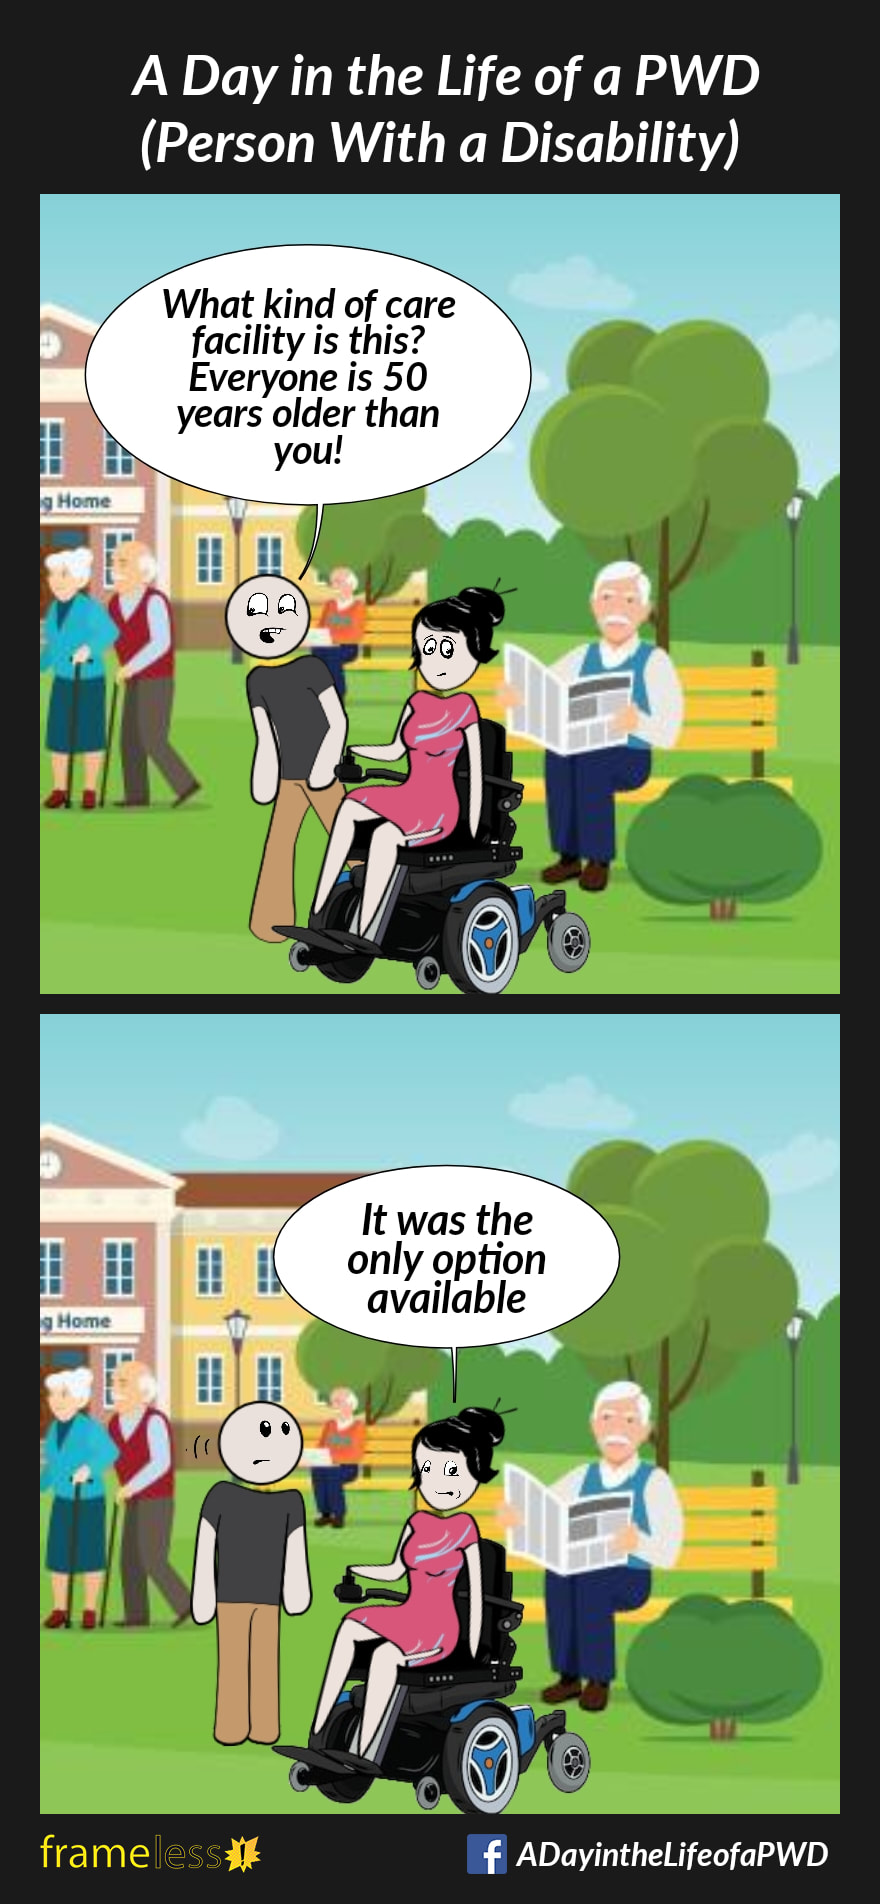 COMIC STRIP 
A Day in the Life of a PWD (Person With a Disability) 

Frame 1:
A woman in a power wheelchair and her friend are traveling through the grounds of a long term care facility. All the people nearby are elderly. 
FRIEND: What kind of care facility is this? Everyone is 50 years older than you!

Frame 2:
WOMAN: It was the only option available 